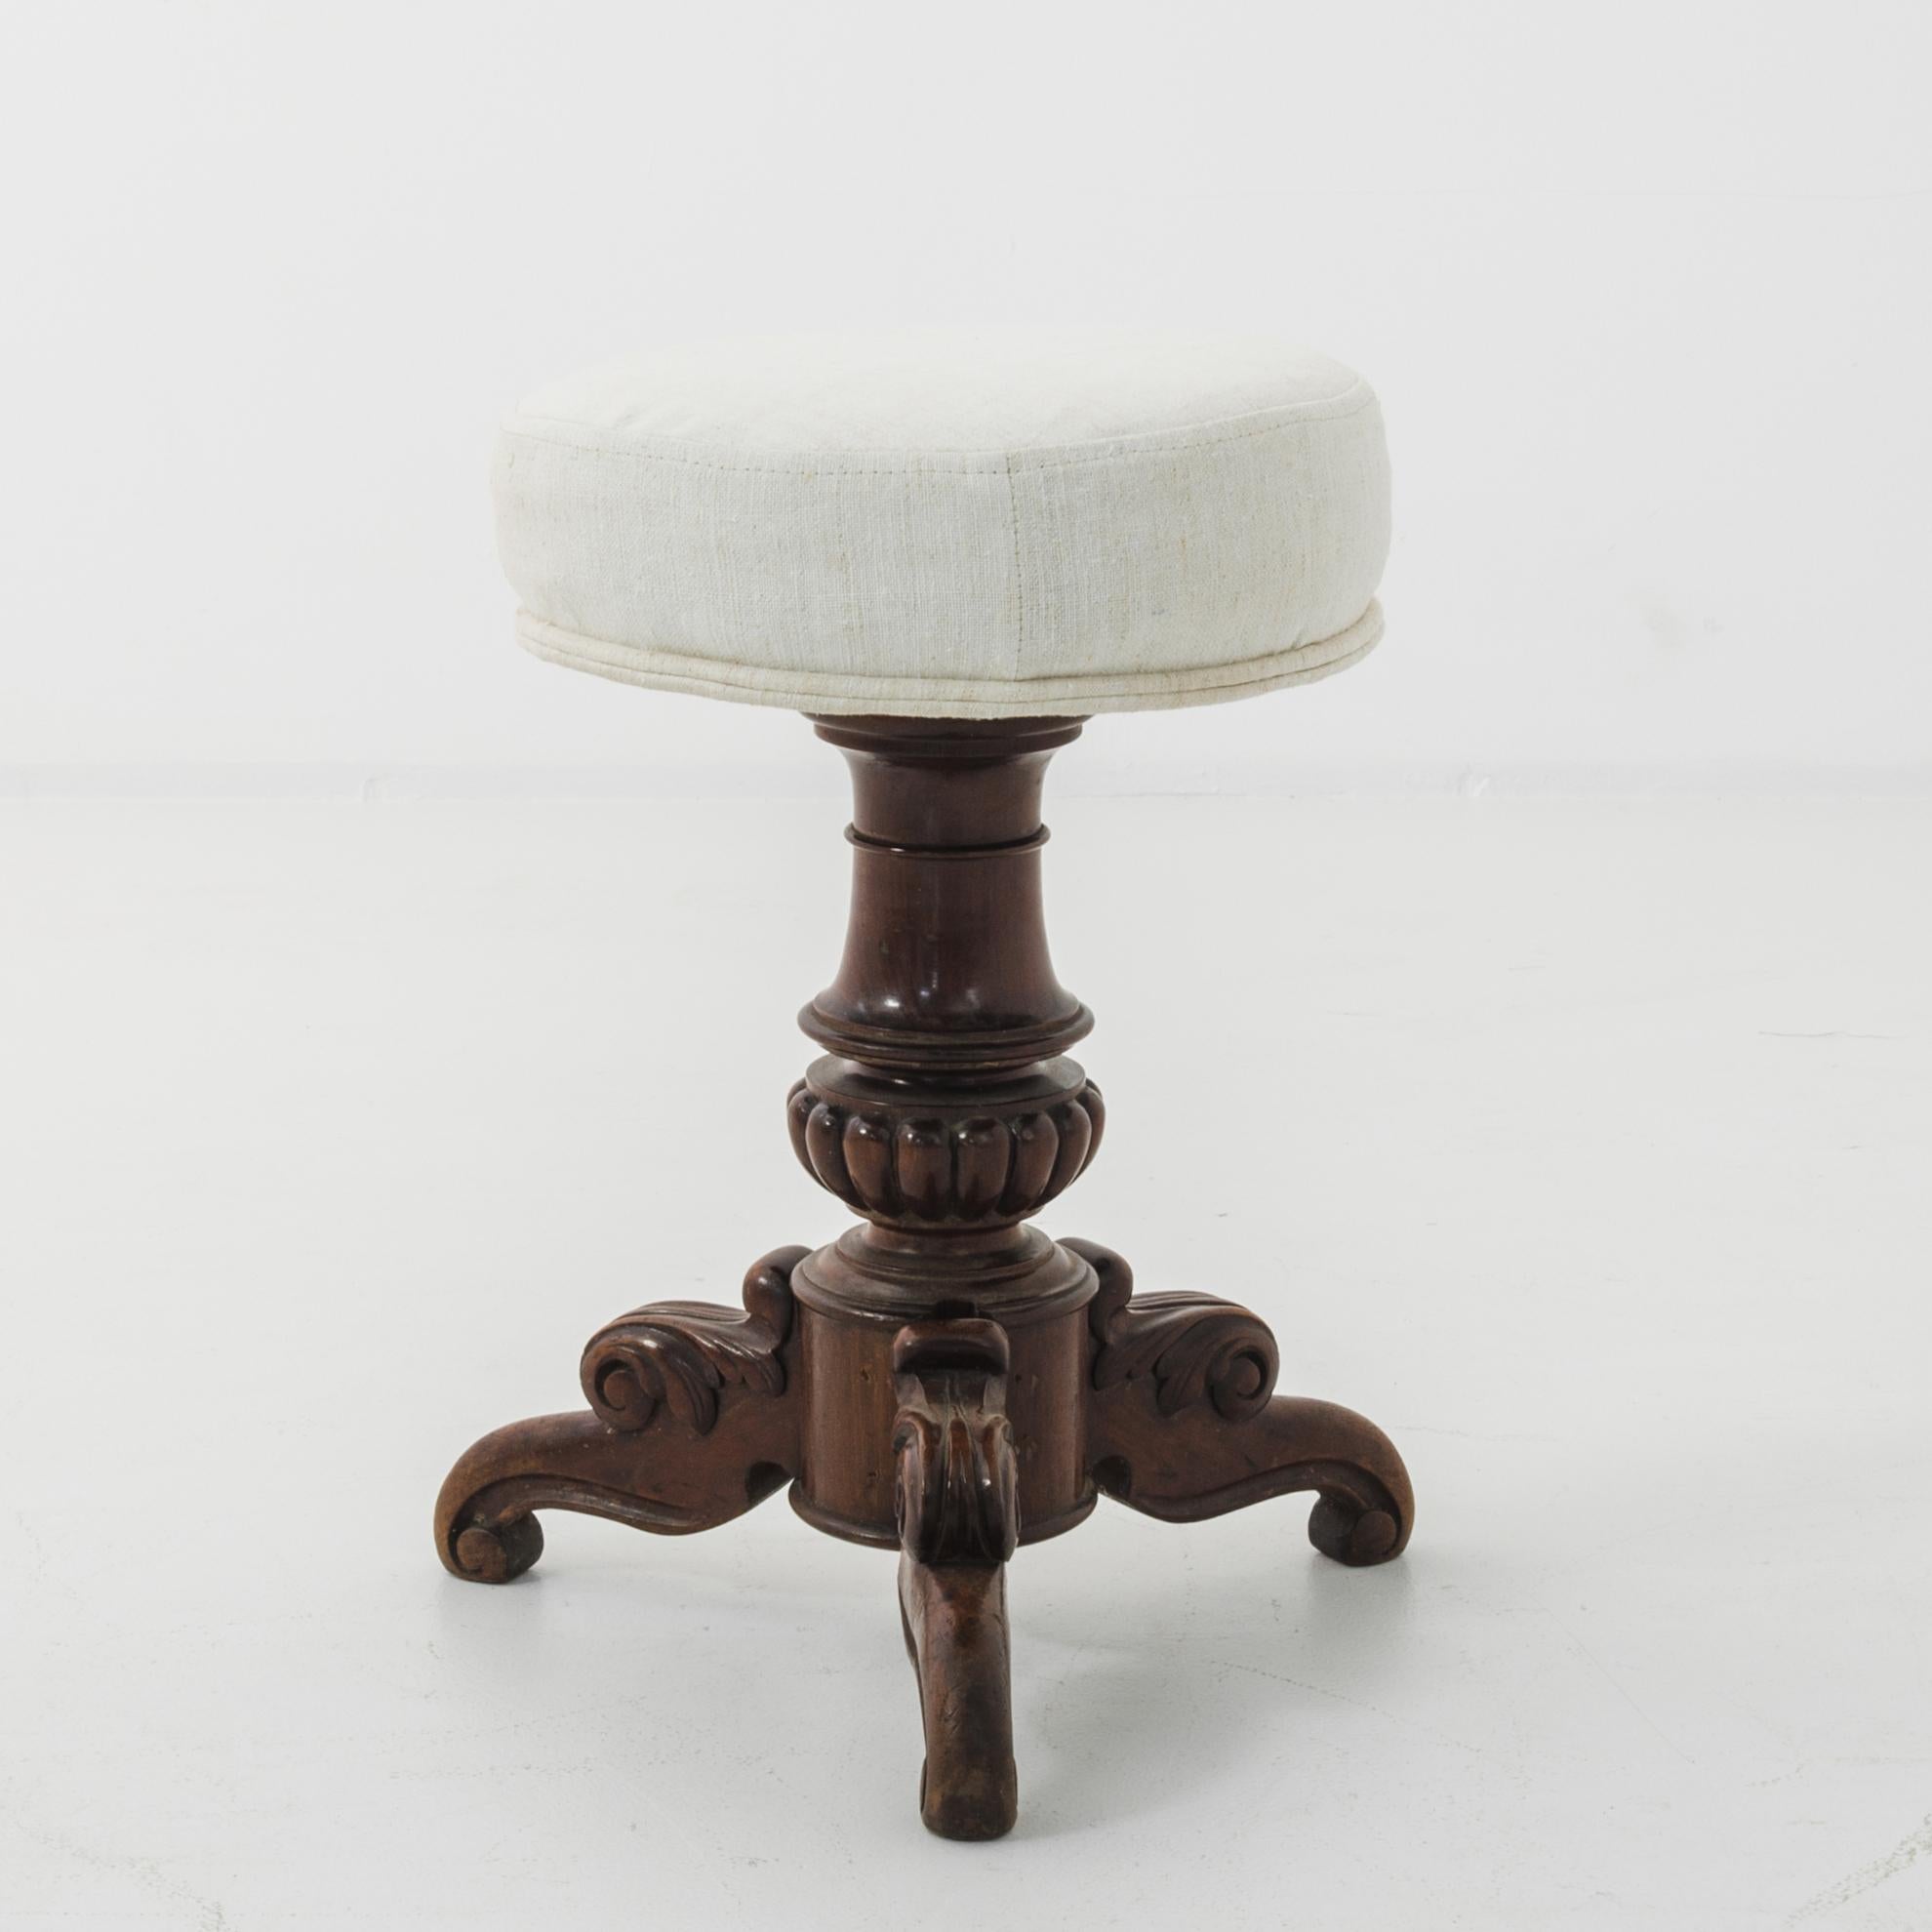 This wooden stool, adjusting with a metal screw, was made in France, circa 1880. Neoclassical elements are on display in the carved ornamentation of gadroons on the turned stand, as well as the scrolls and leaves on the tripod legs. An upholstered